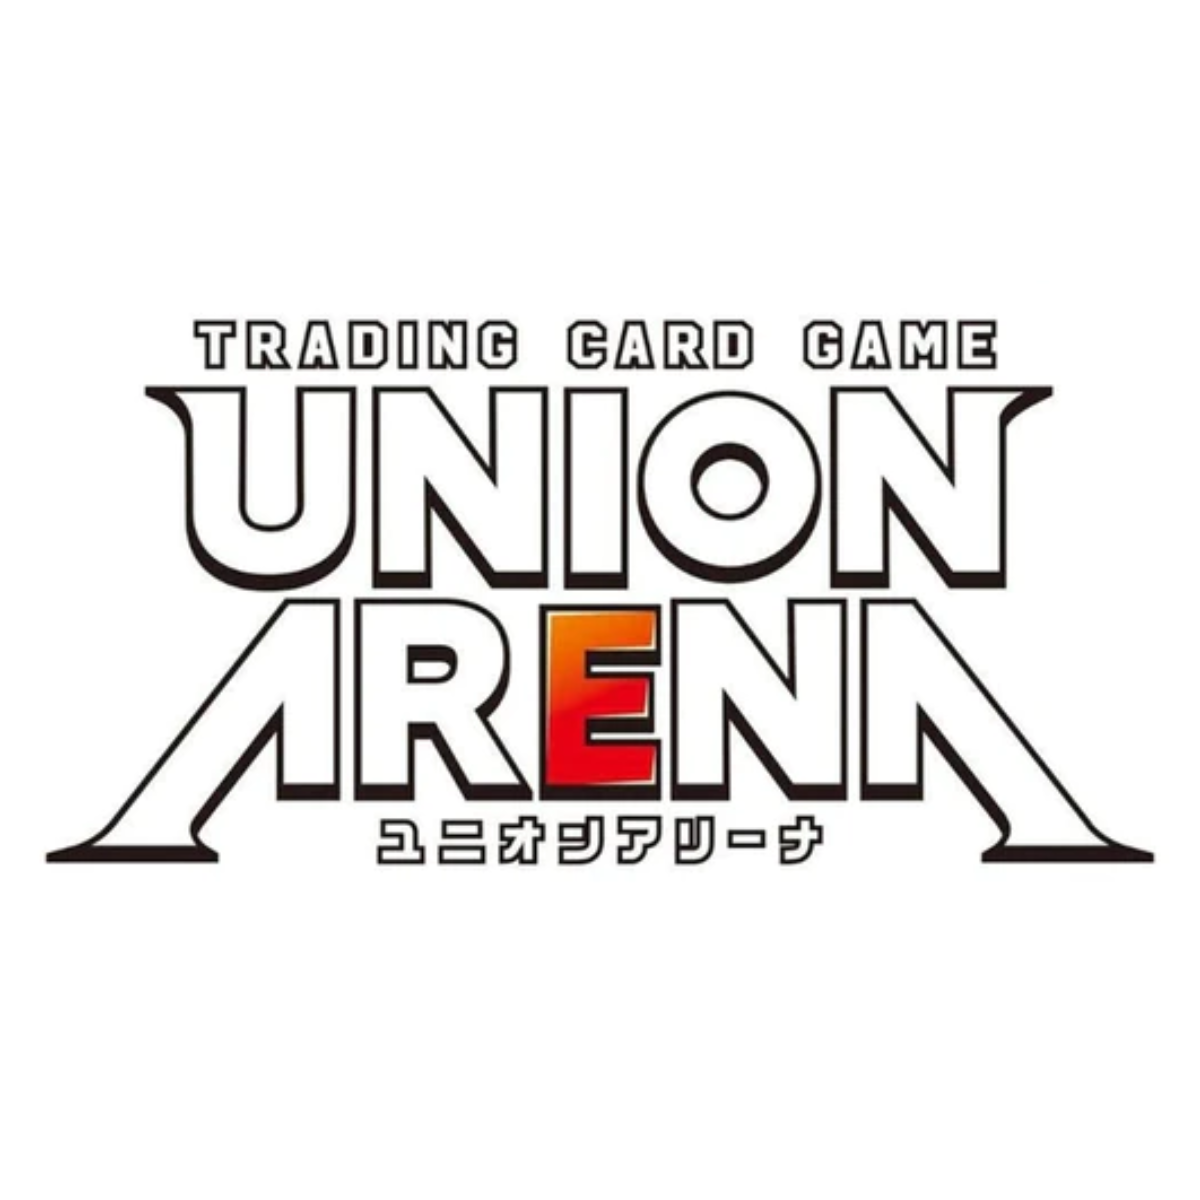 Union Arena Official Sleeve &quot;Sword Art Online&quot;-Bandai Namco-Ace Cards &amp; Collectibles